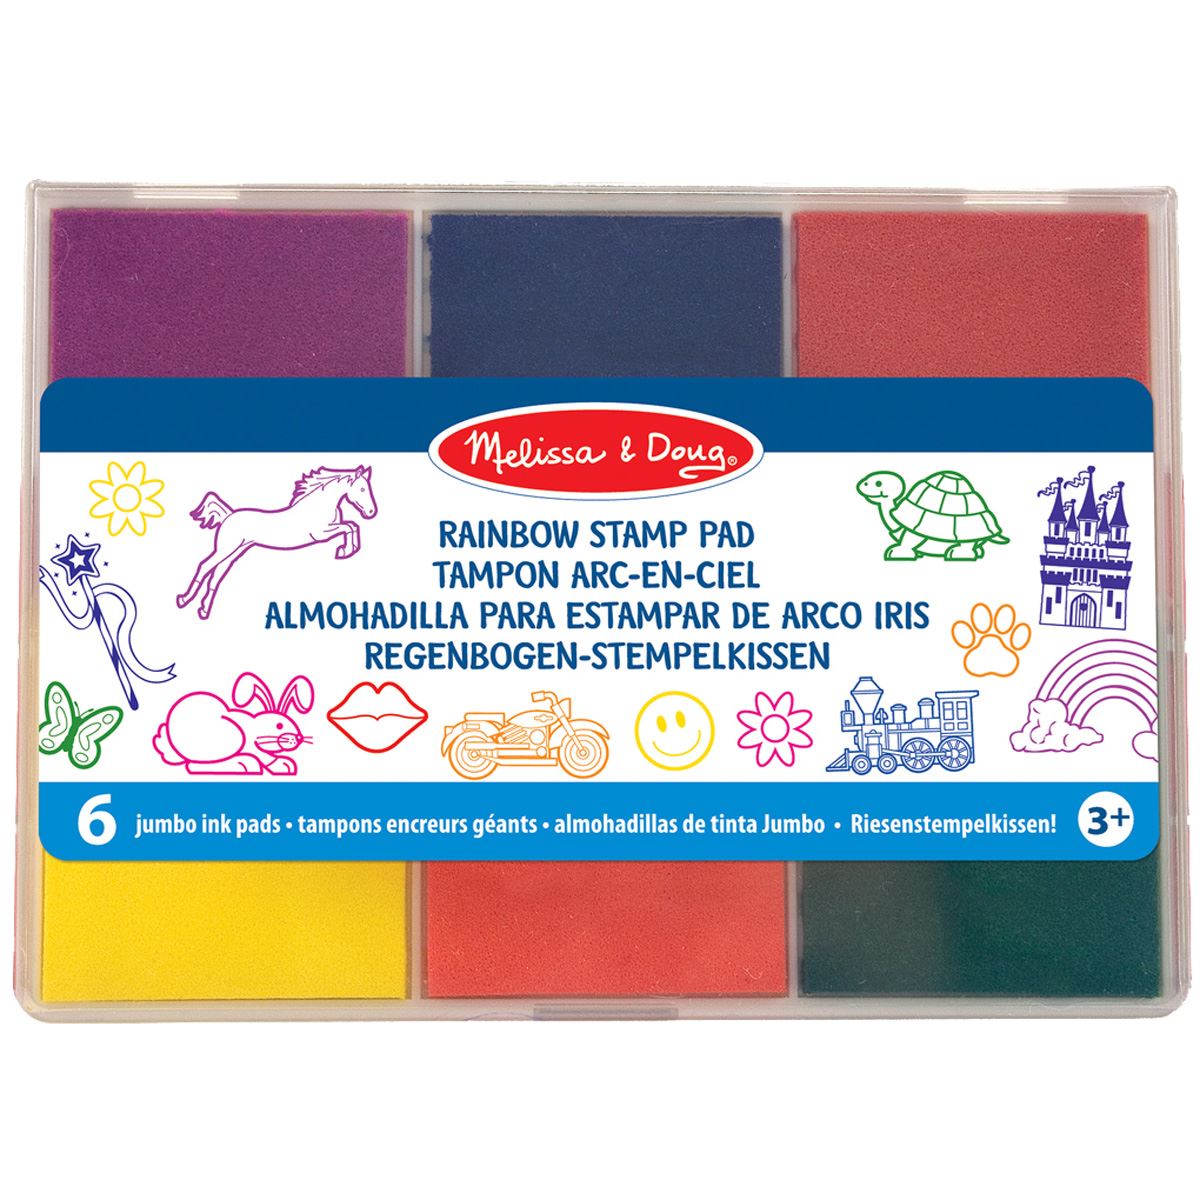 7 Washable Ink Pads for Rubber Stamps, Letter Stamps, Paw Print Stamp Pad  For Dogs, Baby